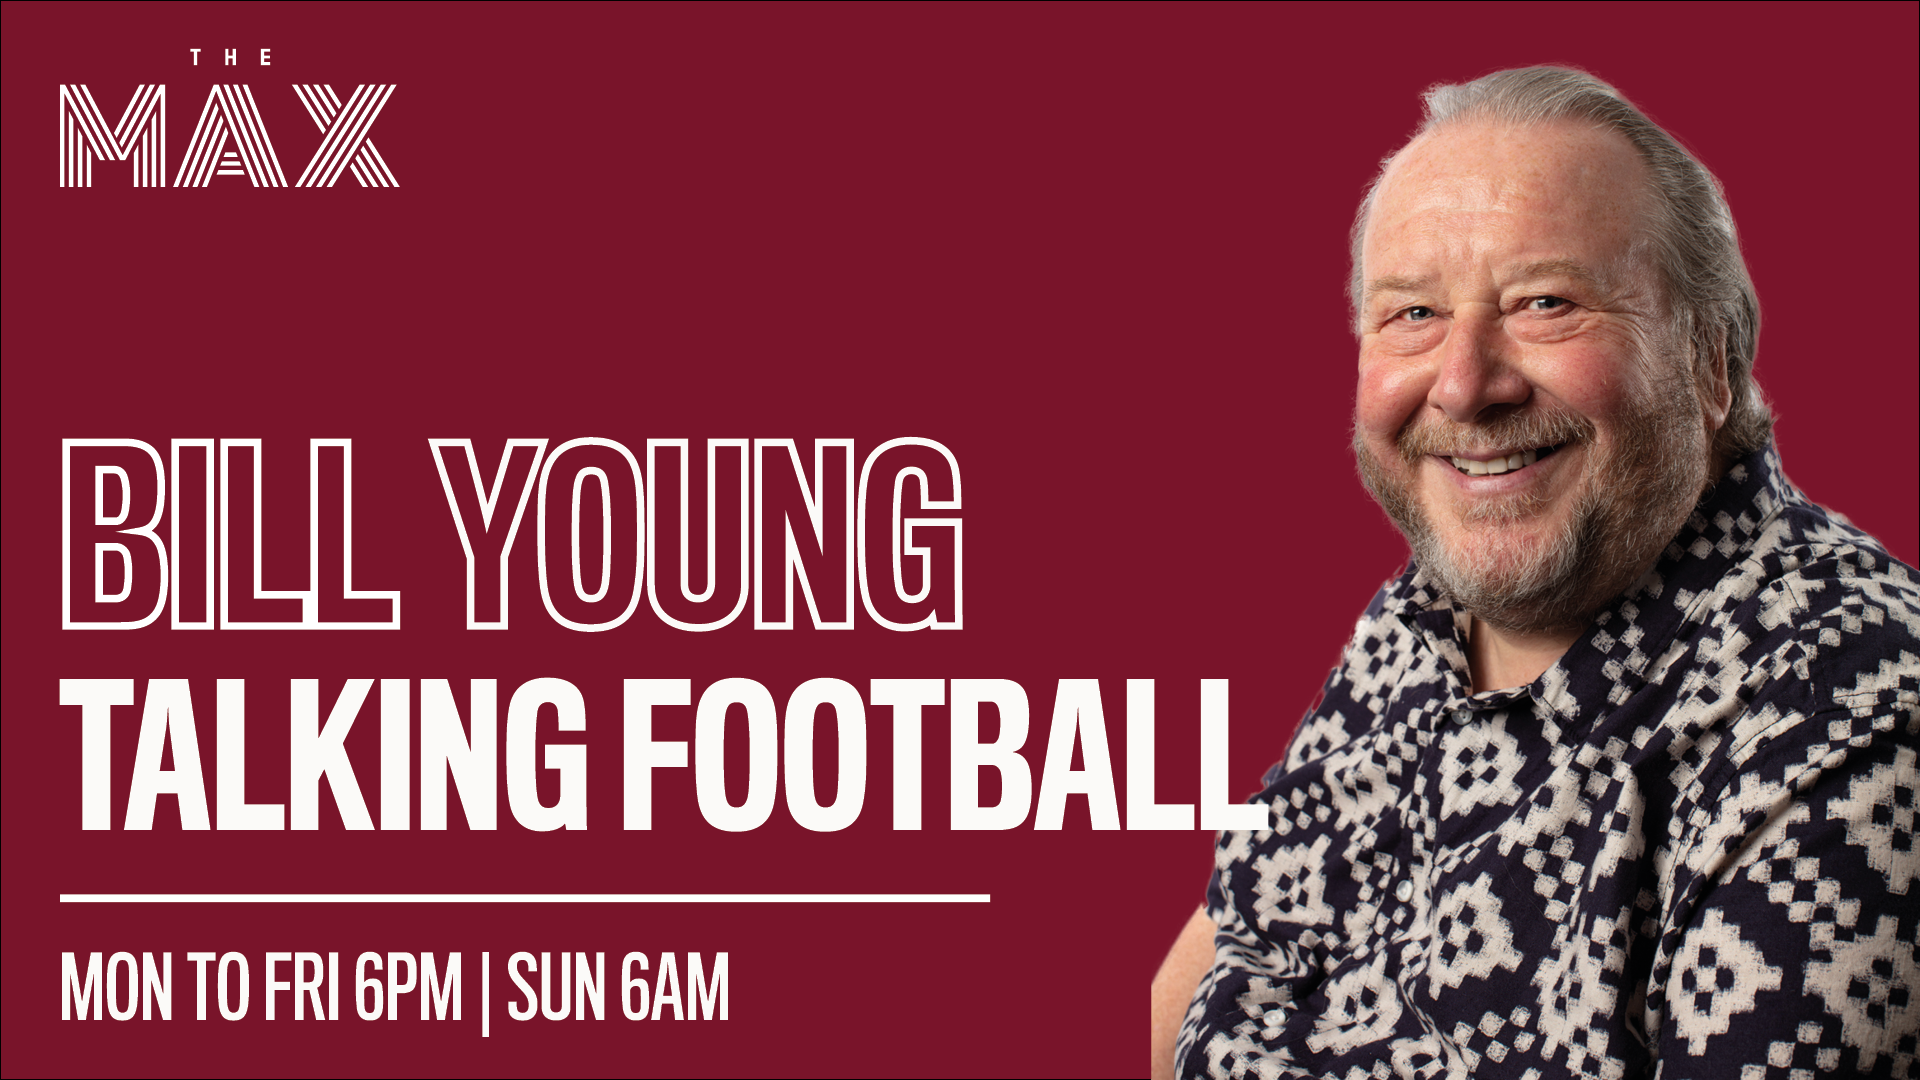 Talking Football with Bill Young - Tuesday 20th April